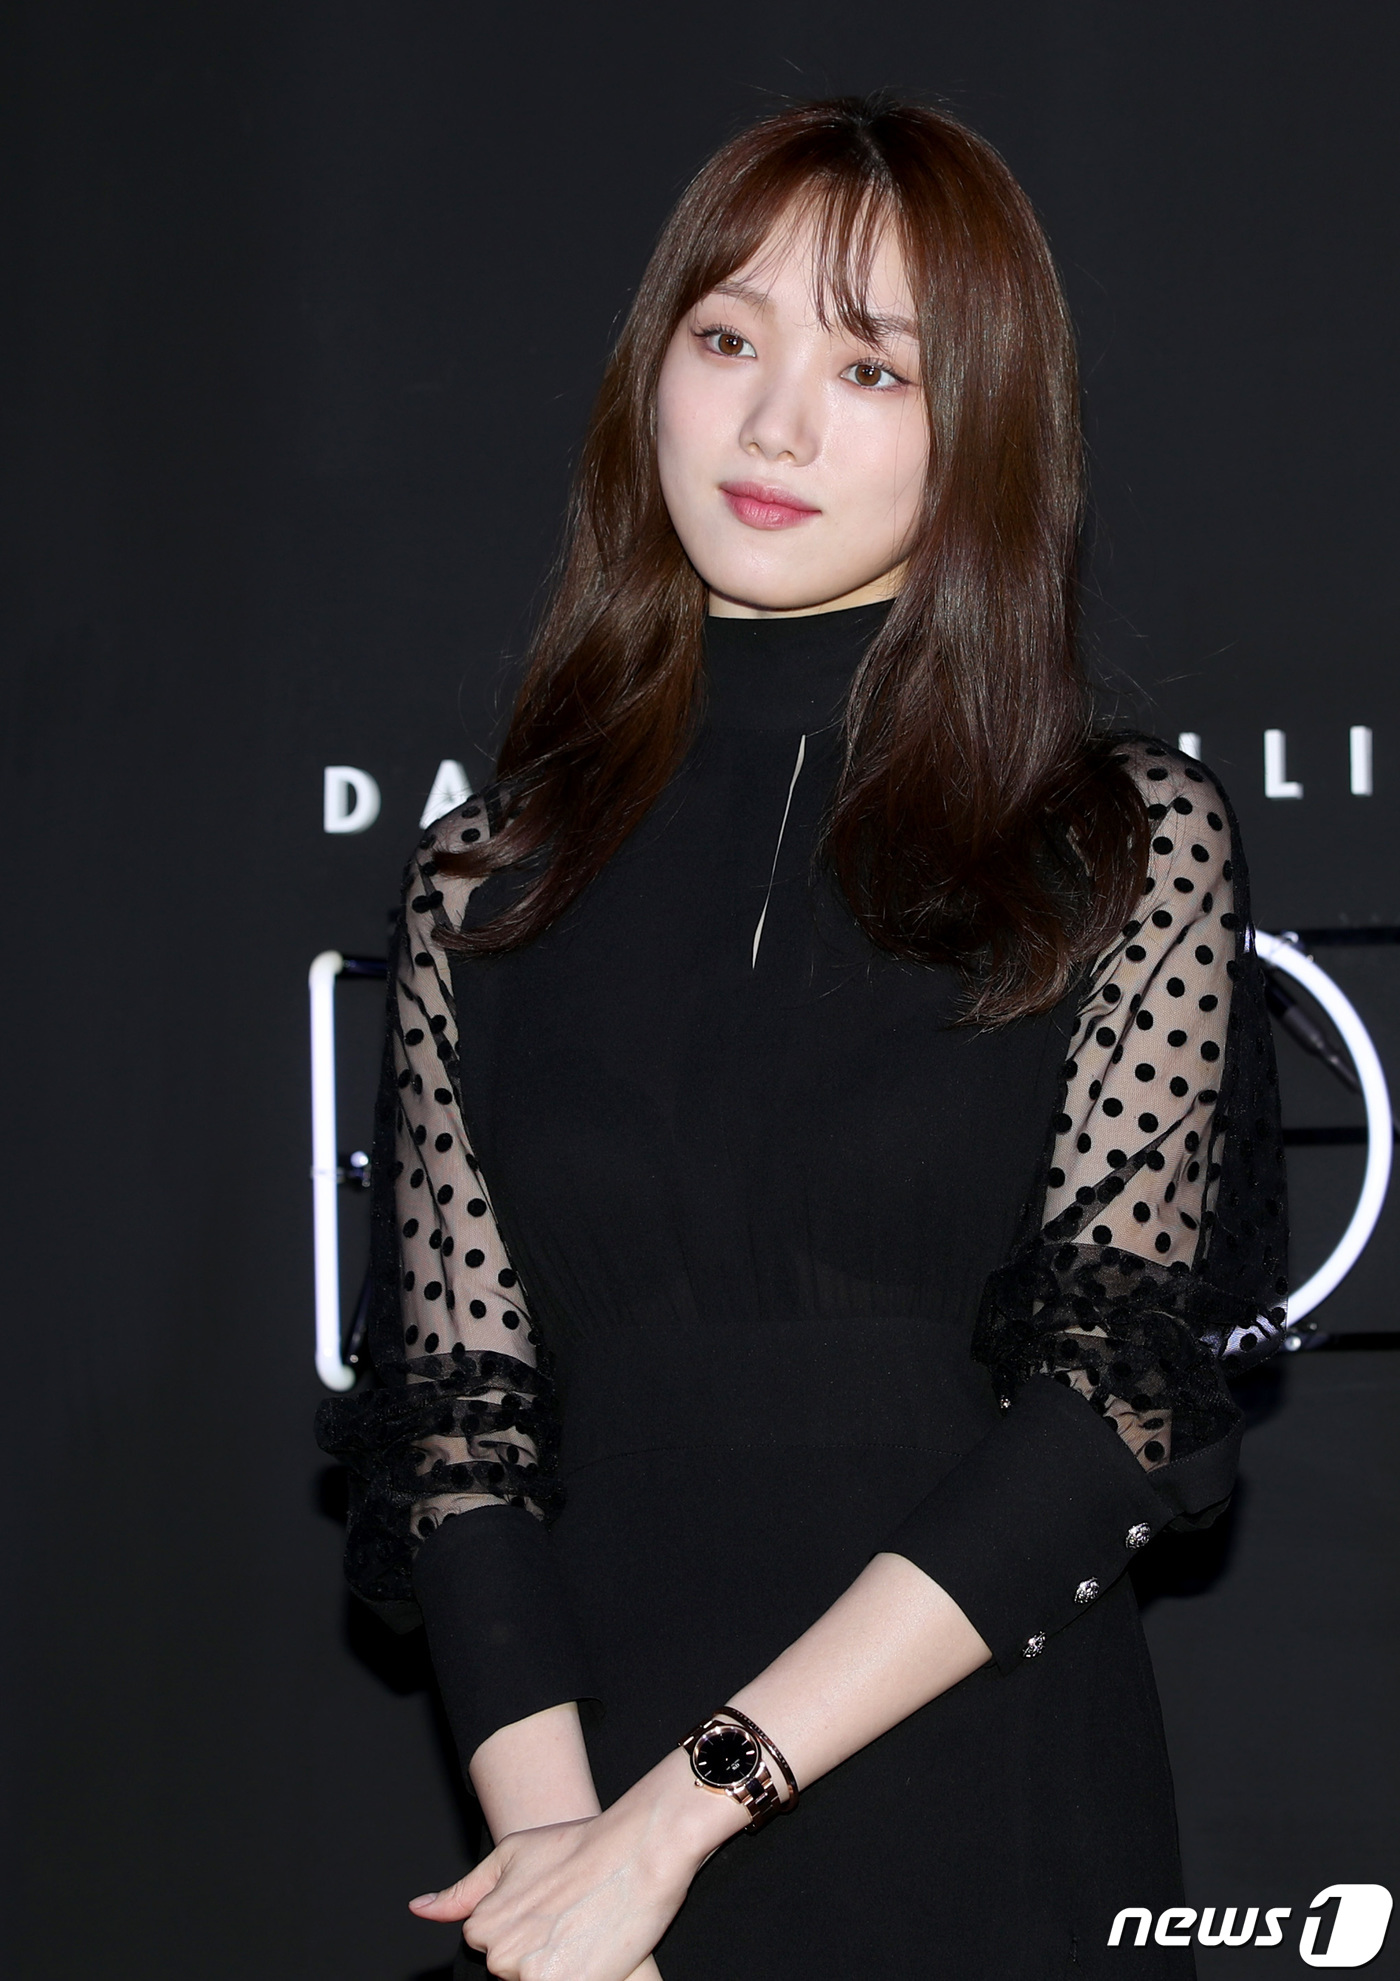 Seoul=) = Actor Lee Sung-kyung poses for a photo event at a store in Seoul Samcheong-dong on Thursday afternoon.October 17, 2019